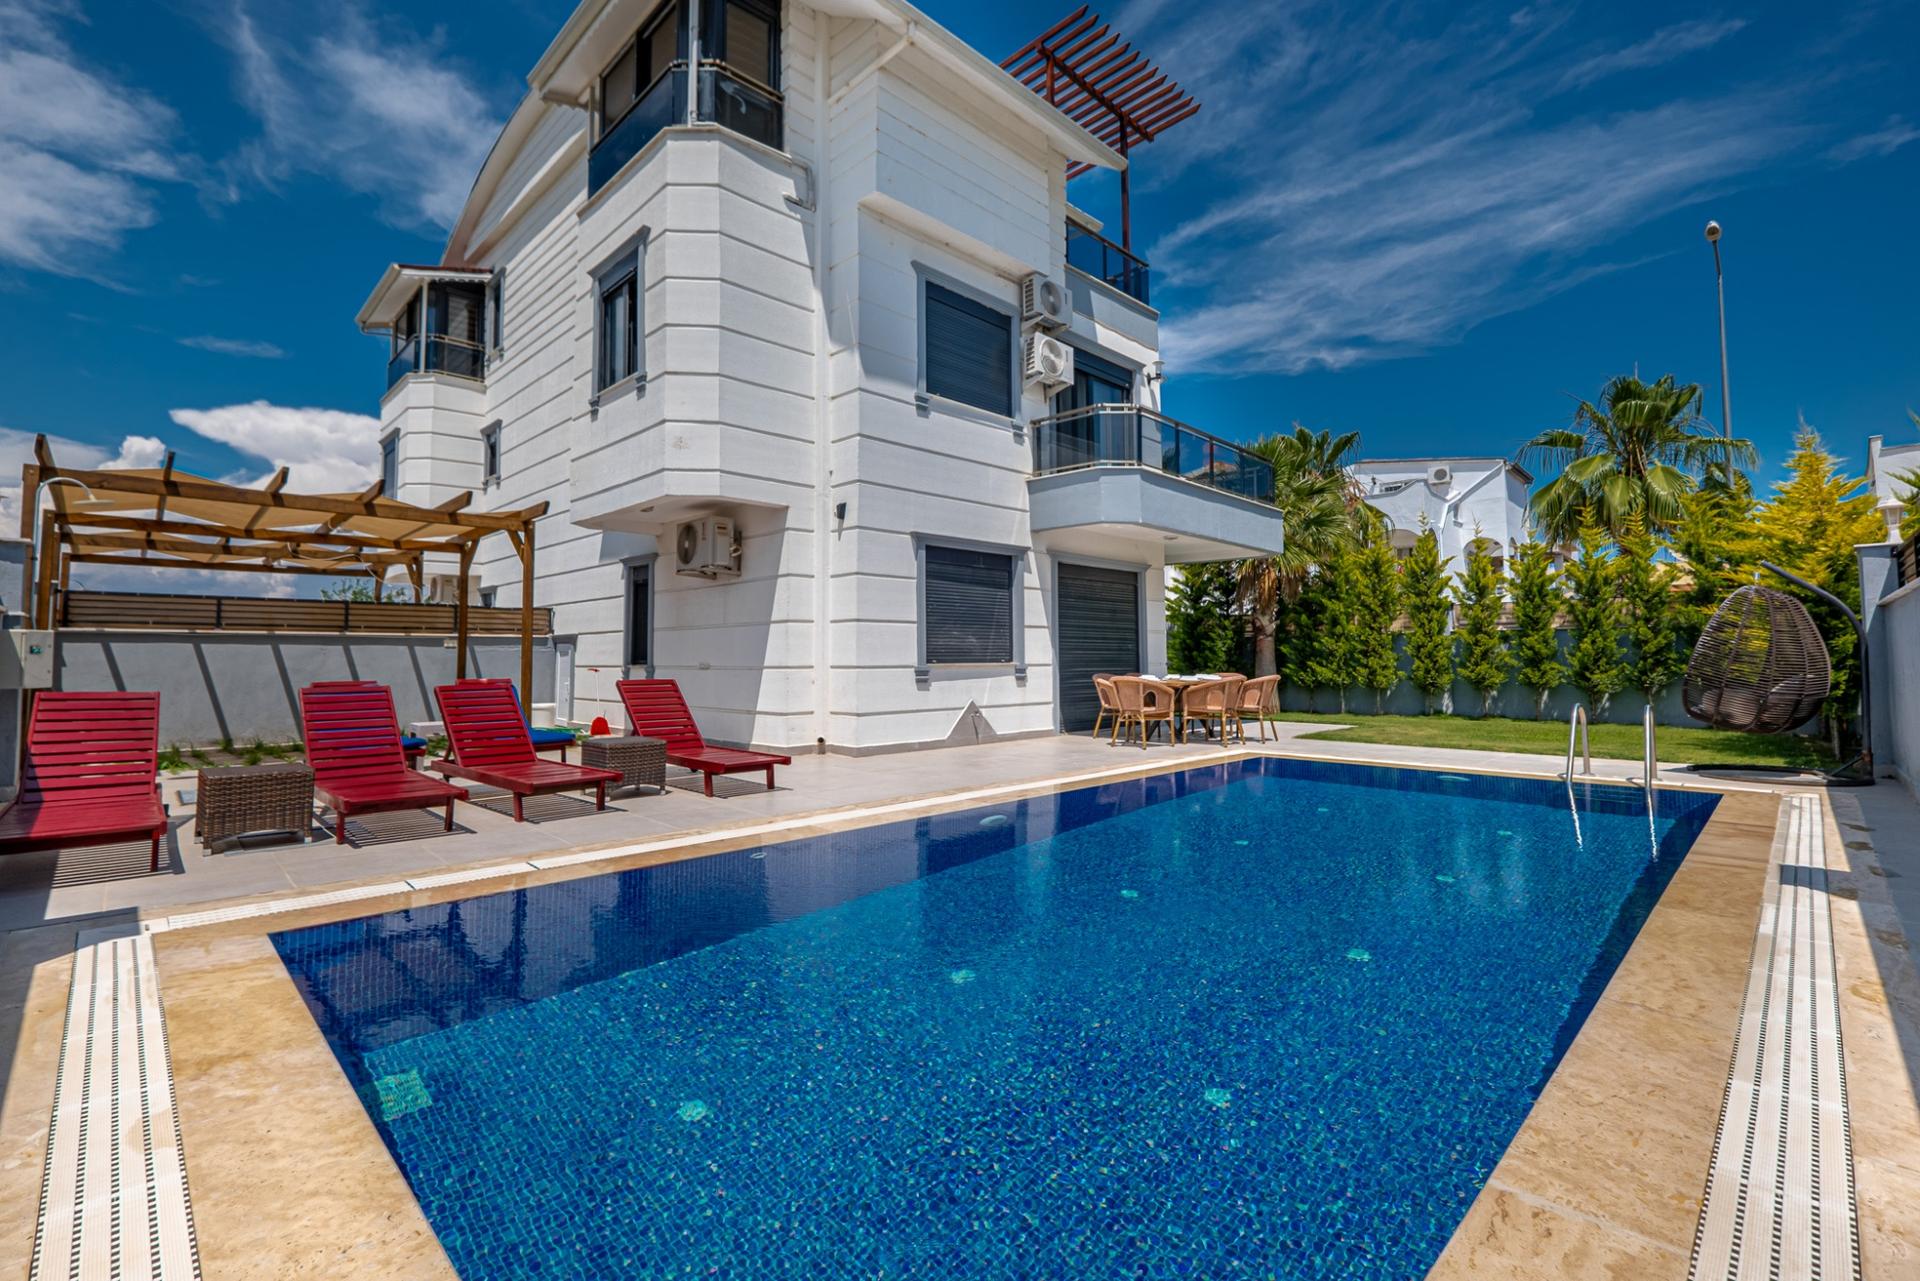 You will create unforgettable memories in our villa with private pool, garden and jacuzzi.